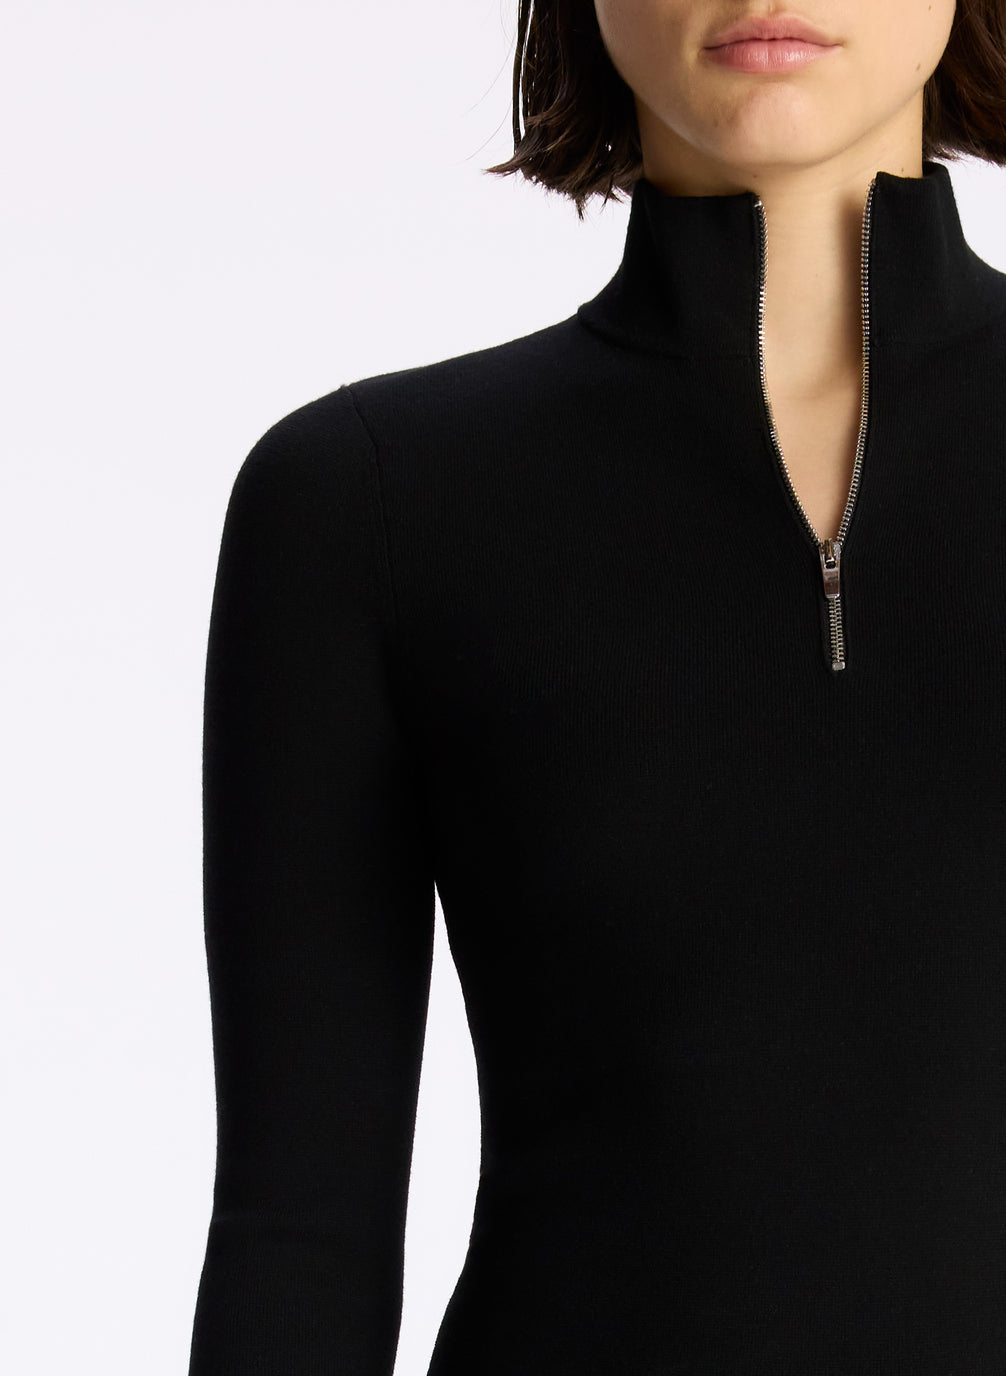 detail view of woman wearing black half zip compact knit long sleeve top and black pants